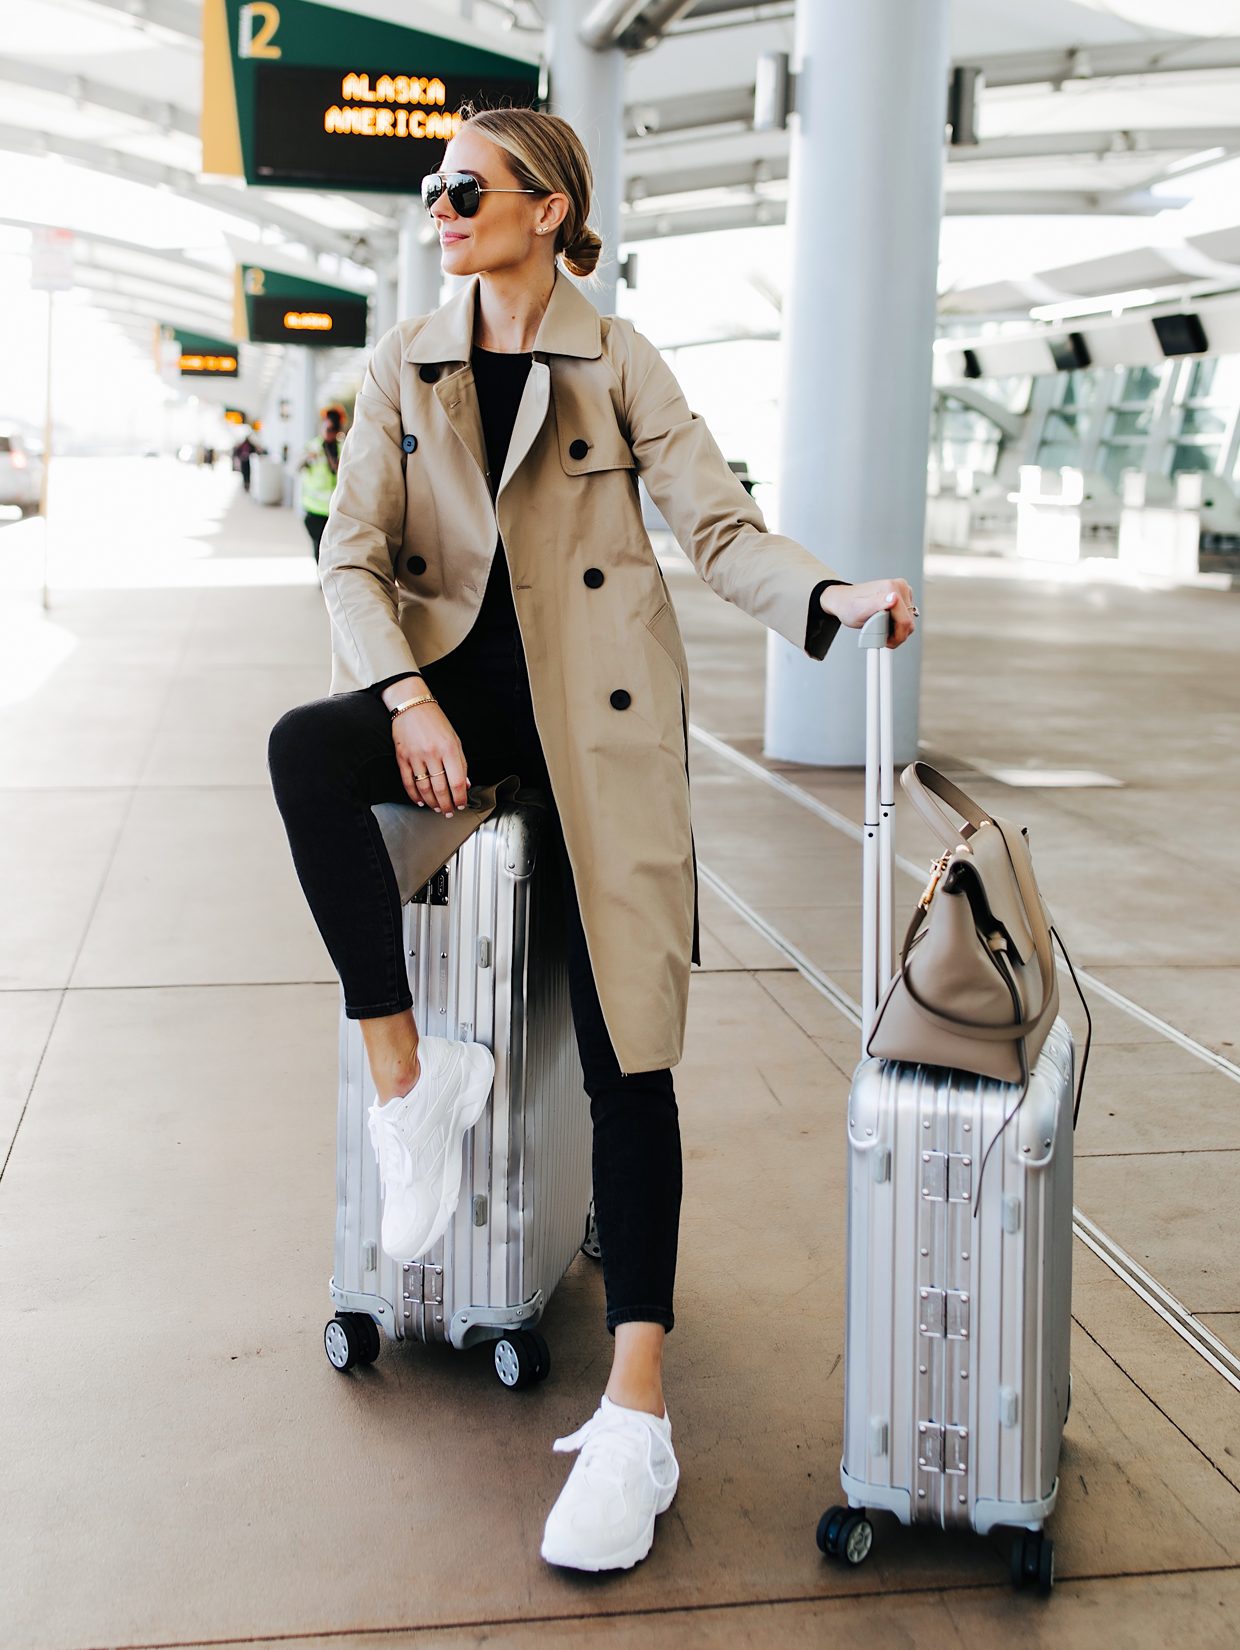 Fashion Jackson Airport Travel Outfit Trench Coat Black Skinny Jeans Reebok Aztrek White Sneakers Rimowa Luggage Featured Image